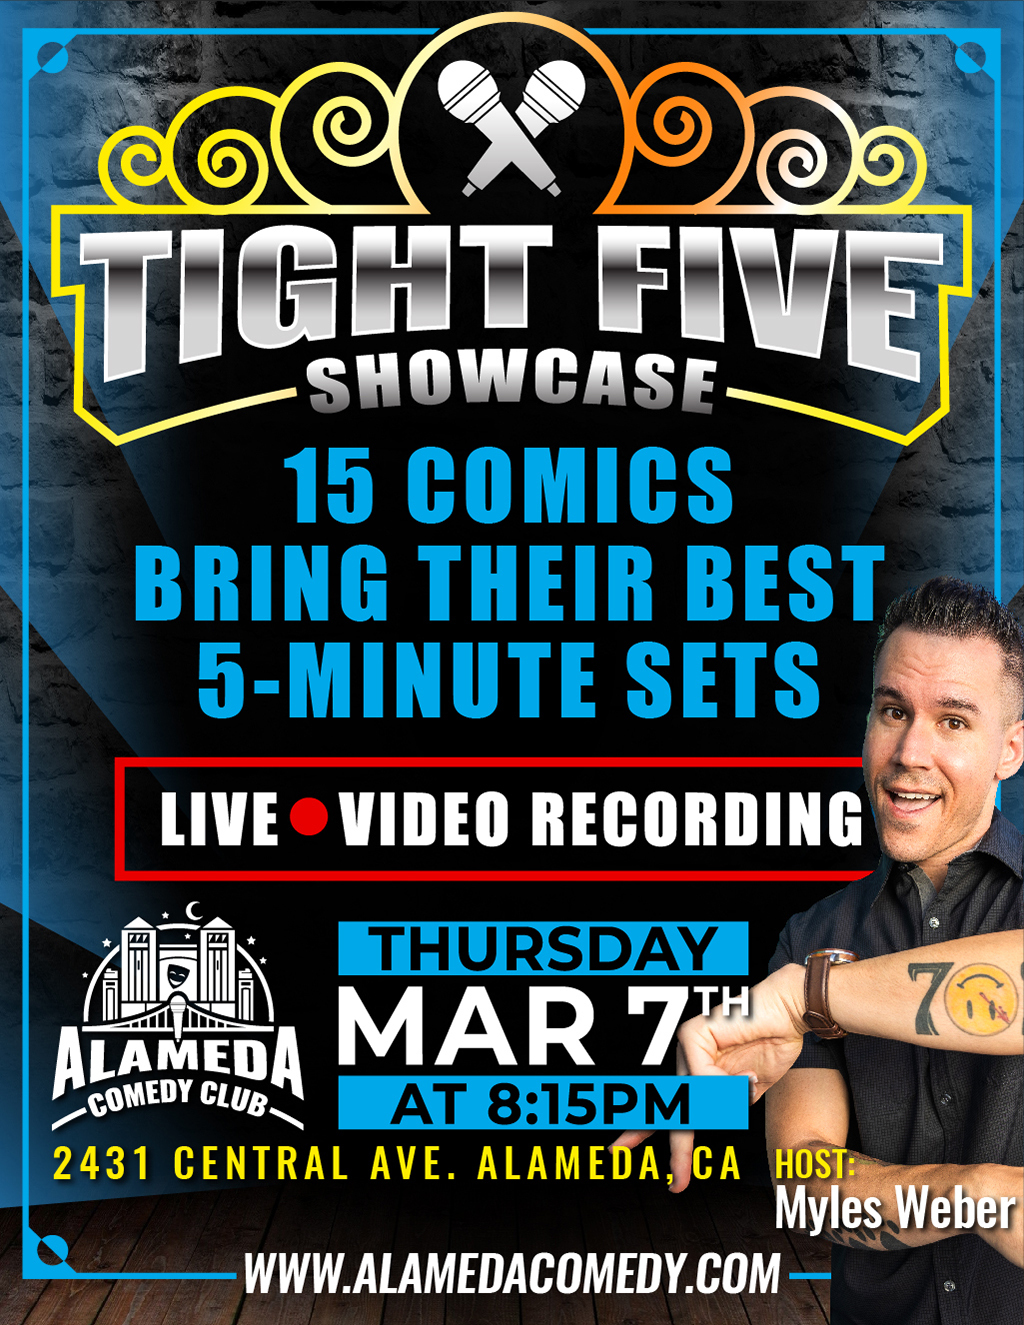 Alameda Comedy Club GET READY TO LAUGH  Alameda Comedy Club to Showcase 15 Comics with their Best 5 Minute Sets in Live Video Recording promotion flier on Digifli com